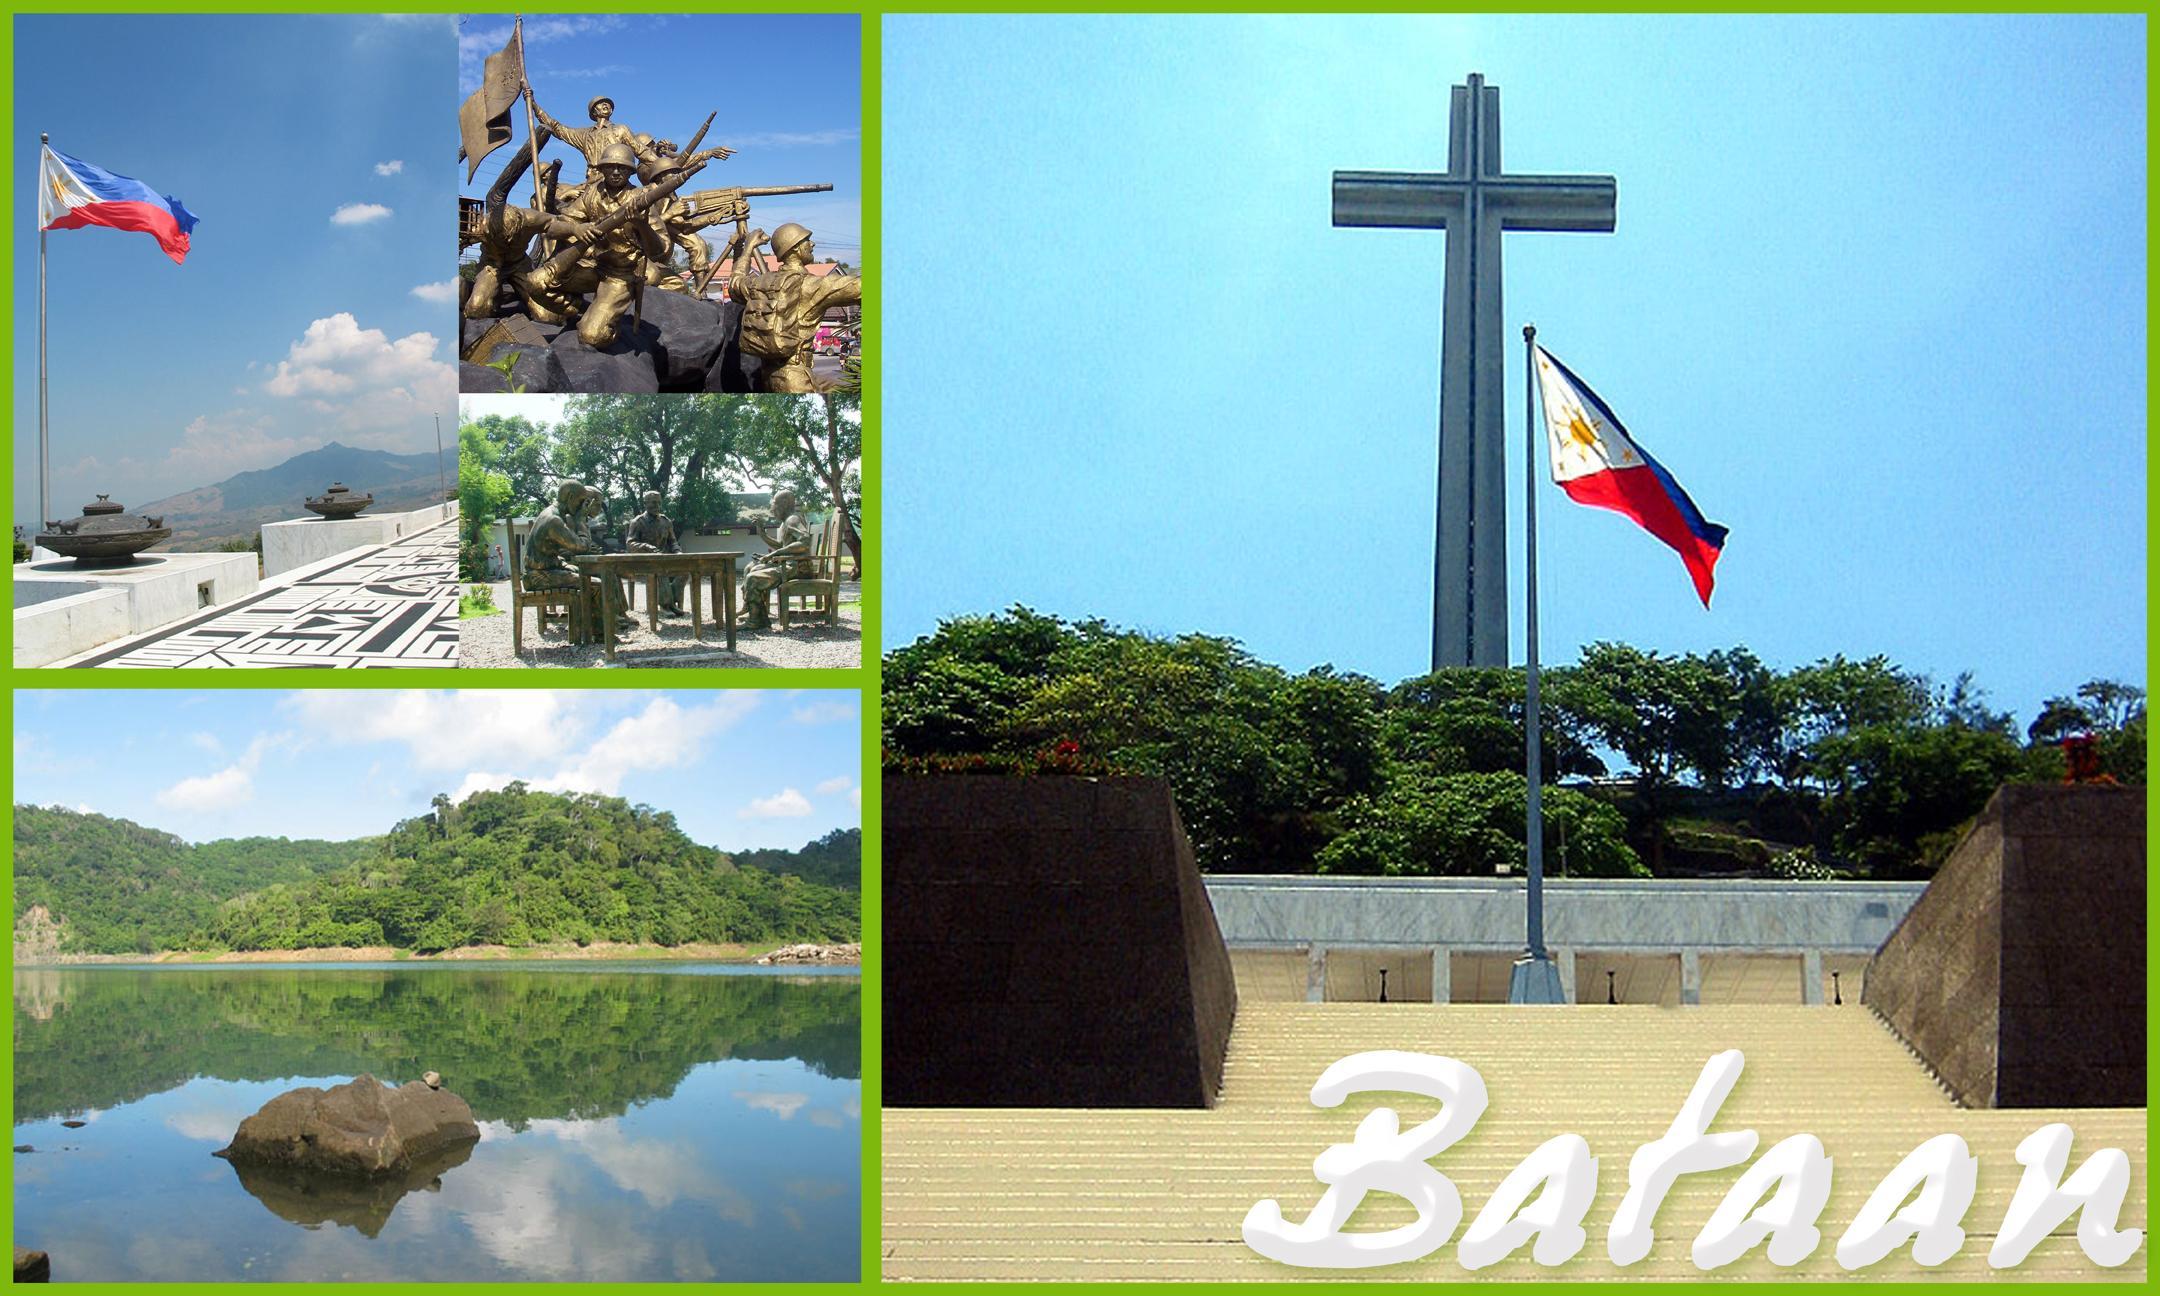 Bataan Day: The Day of Valor